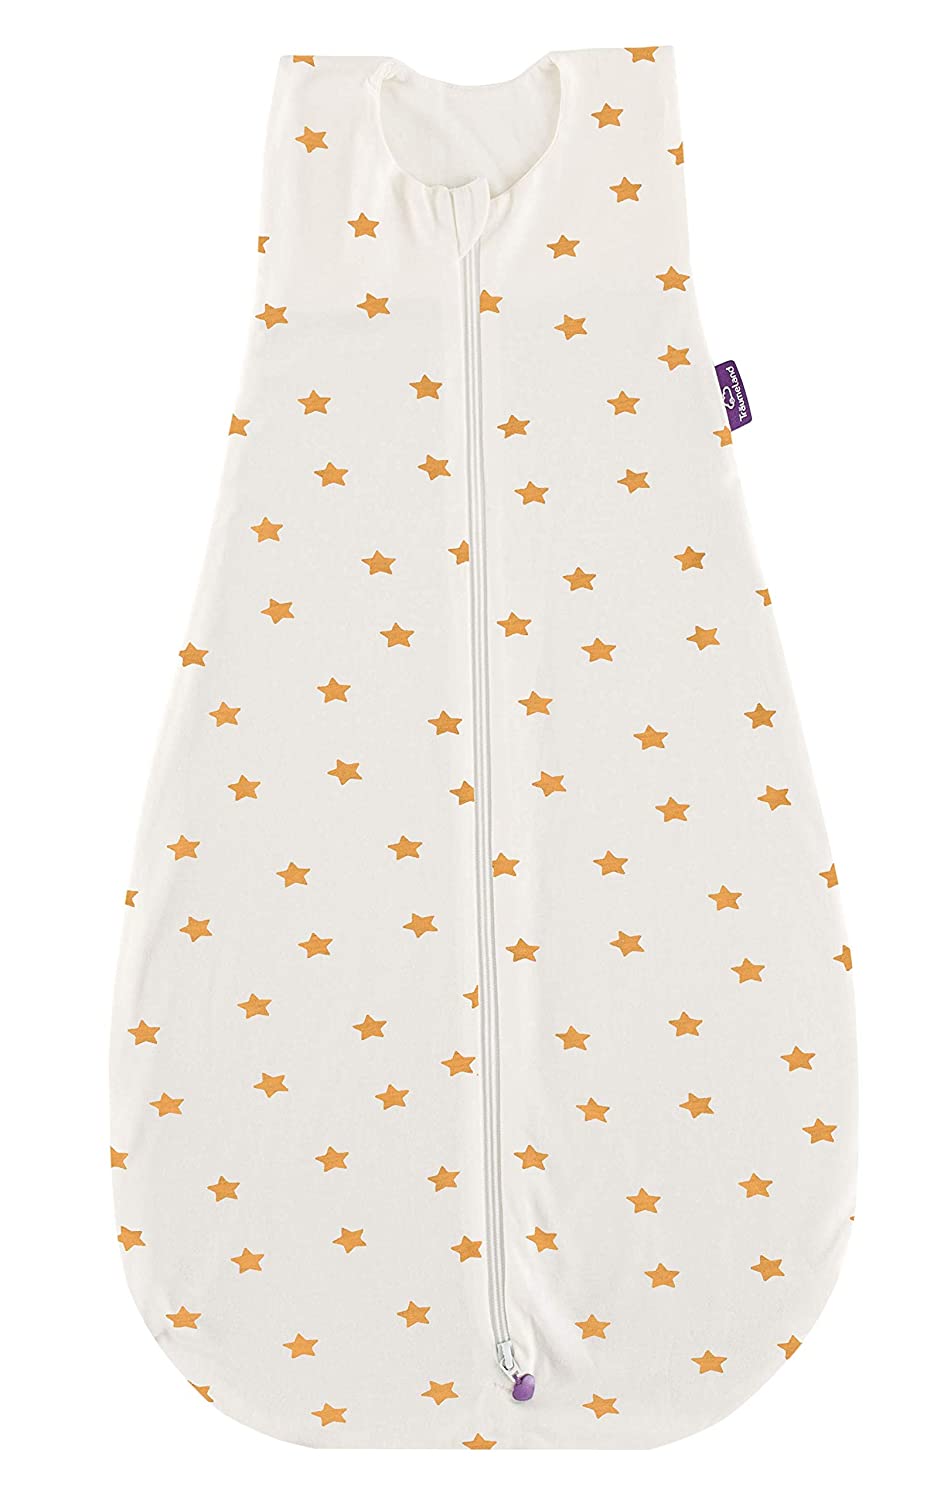 Träumeland ‘Liebmich’ S0300502 Summer Sleeping Bag, Tencel, Size 60 cm, White with Yellow Stars, Without Optical Brightener, Multicoloured, 240 g